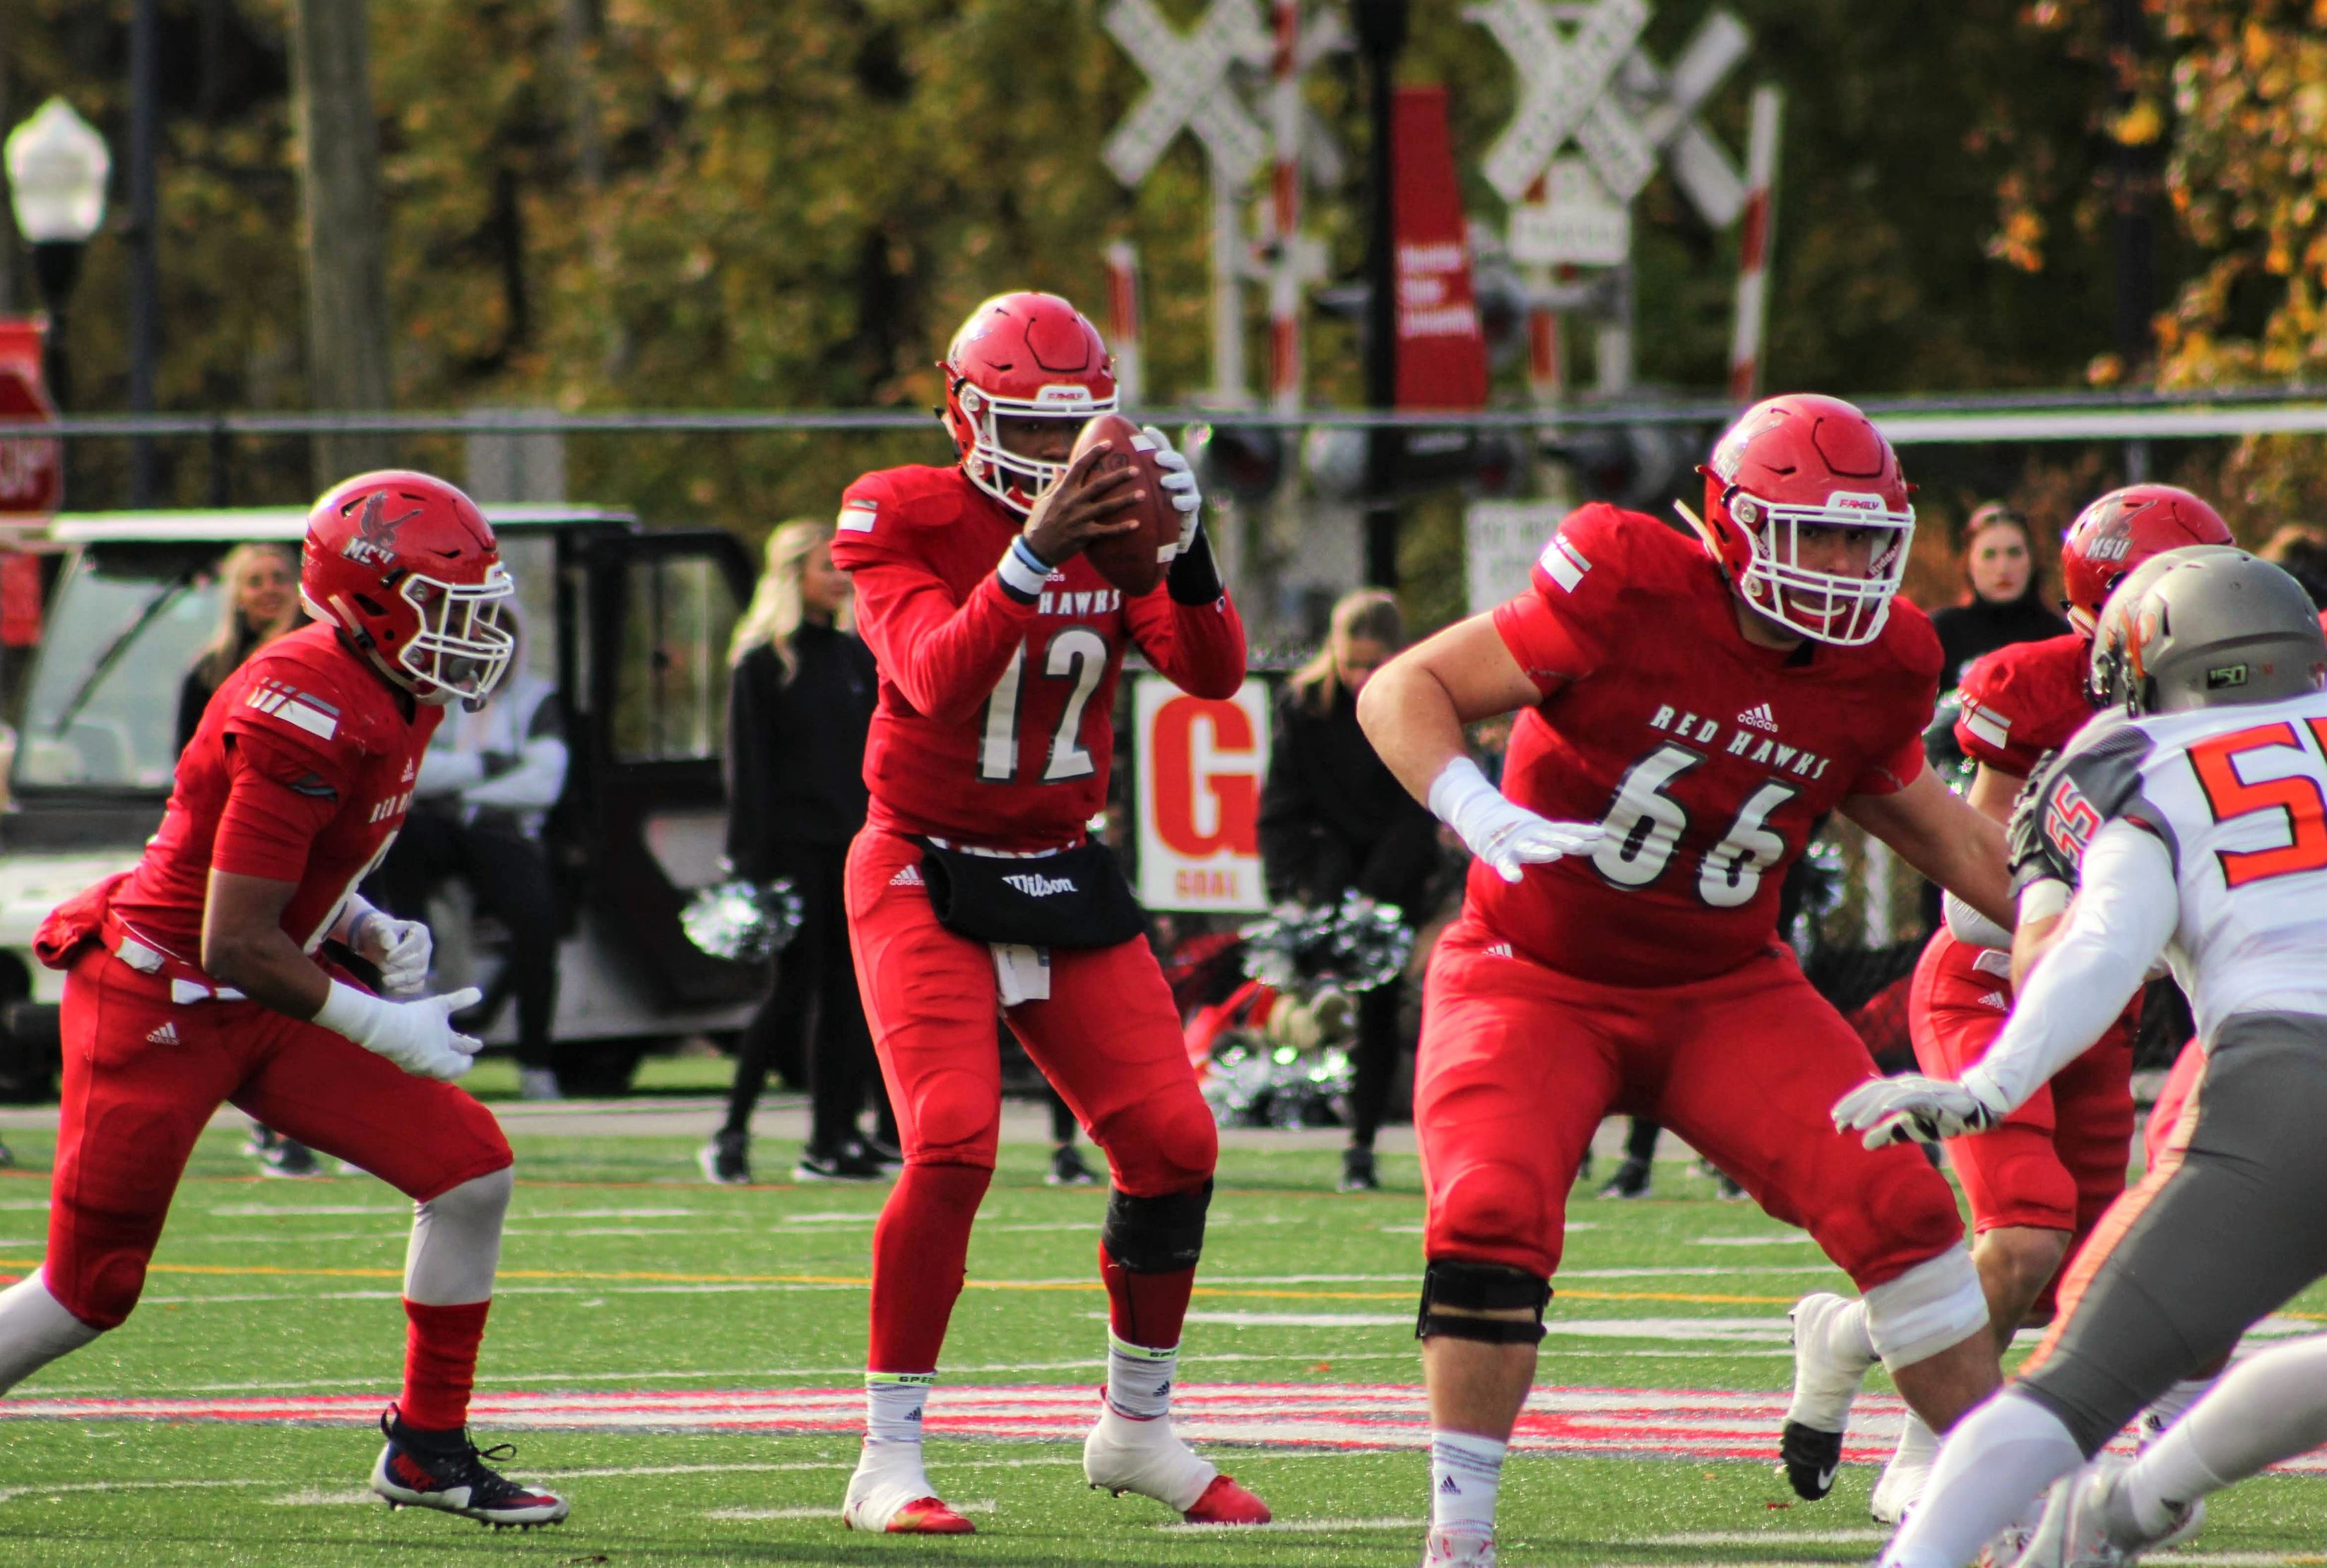 Red Hawks junior quarterback Ja'Quill Burch catches a snap in a 2019 home game against William Paterson University. Ben Caplan | The Montclarion